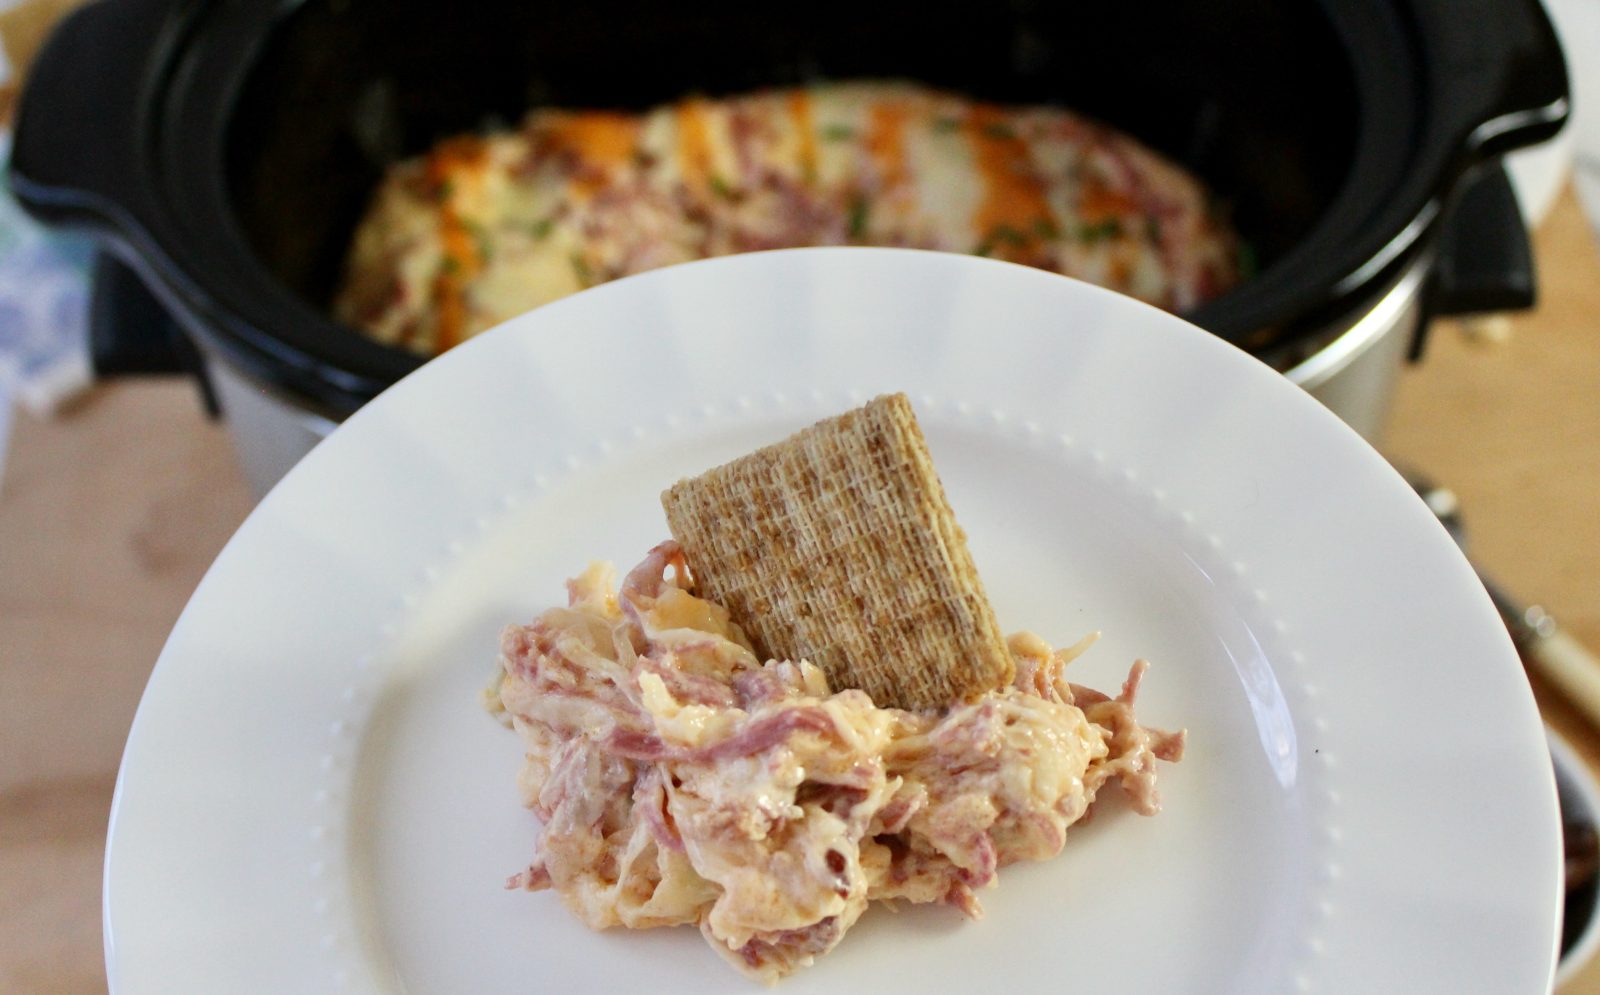 A white plate with a dollop of Slow Cooker Reuben Dip and a Triscuit cracker stuck into the dollop.  In the background is the black slow cooker containing the Slow Cooker Reuben Dip.